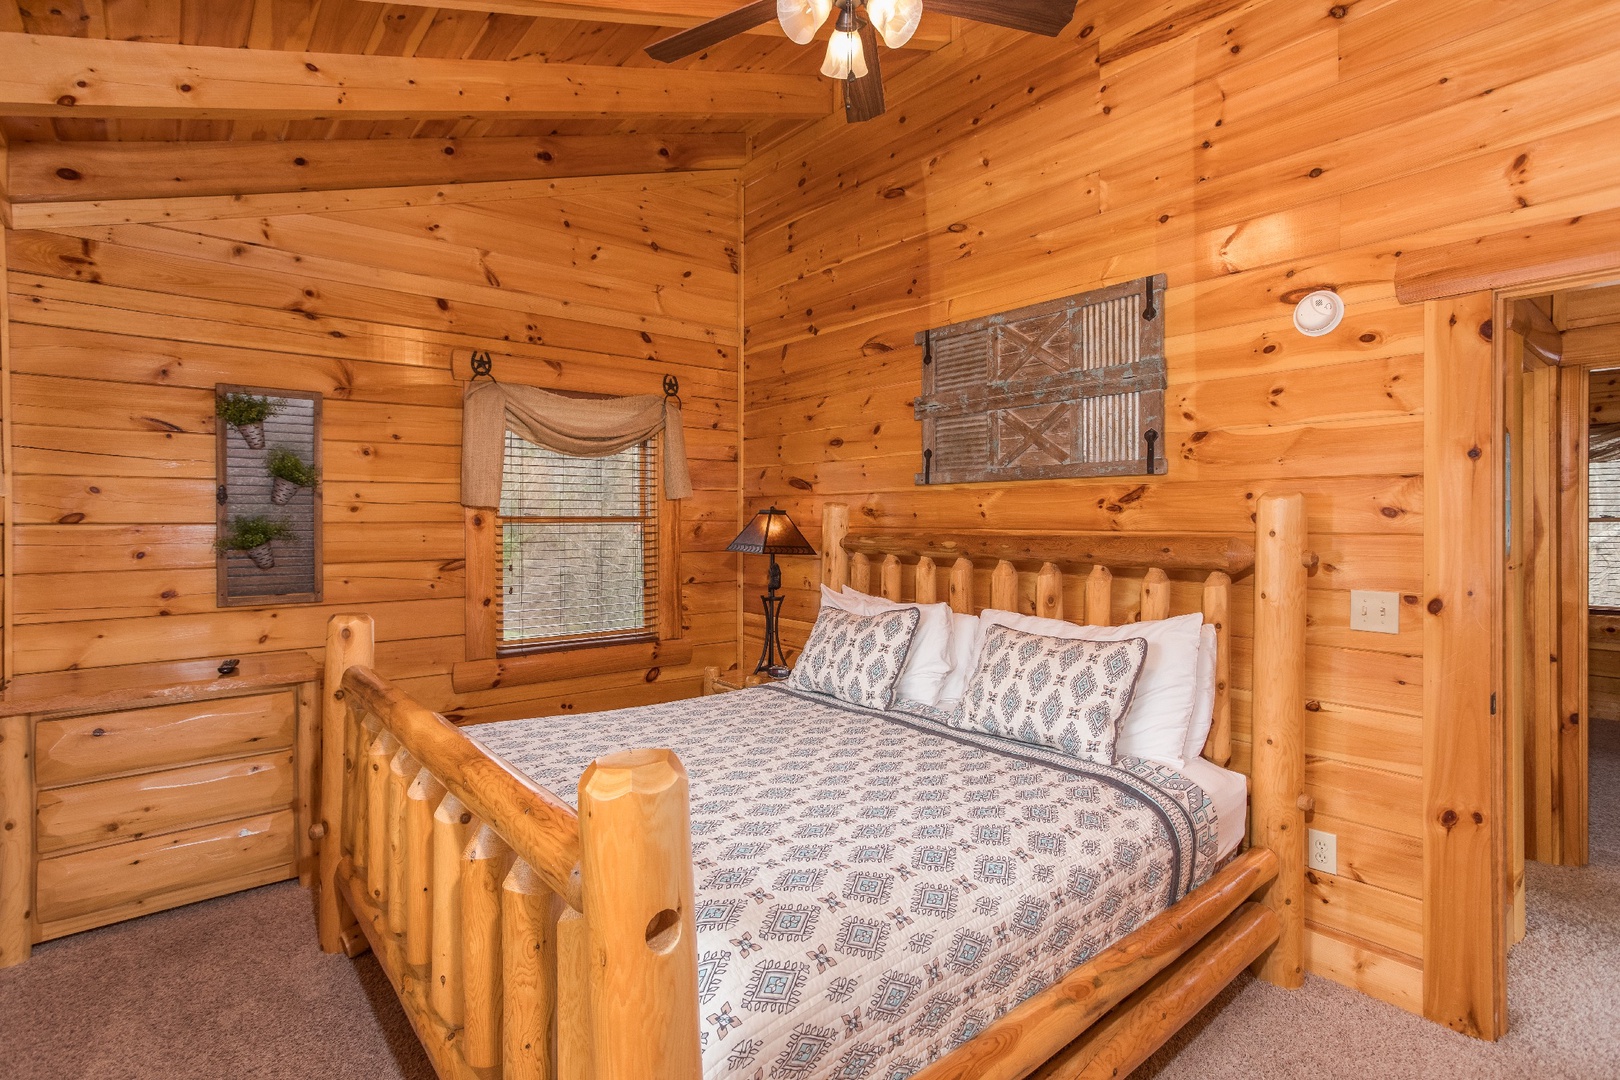 Loft bedroom with a king bed at Mountain View Meadows, a 3 bedroom cabin rental located in Pigeon Forge